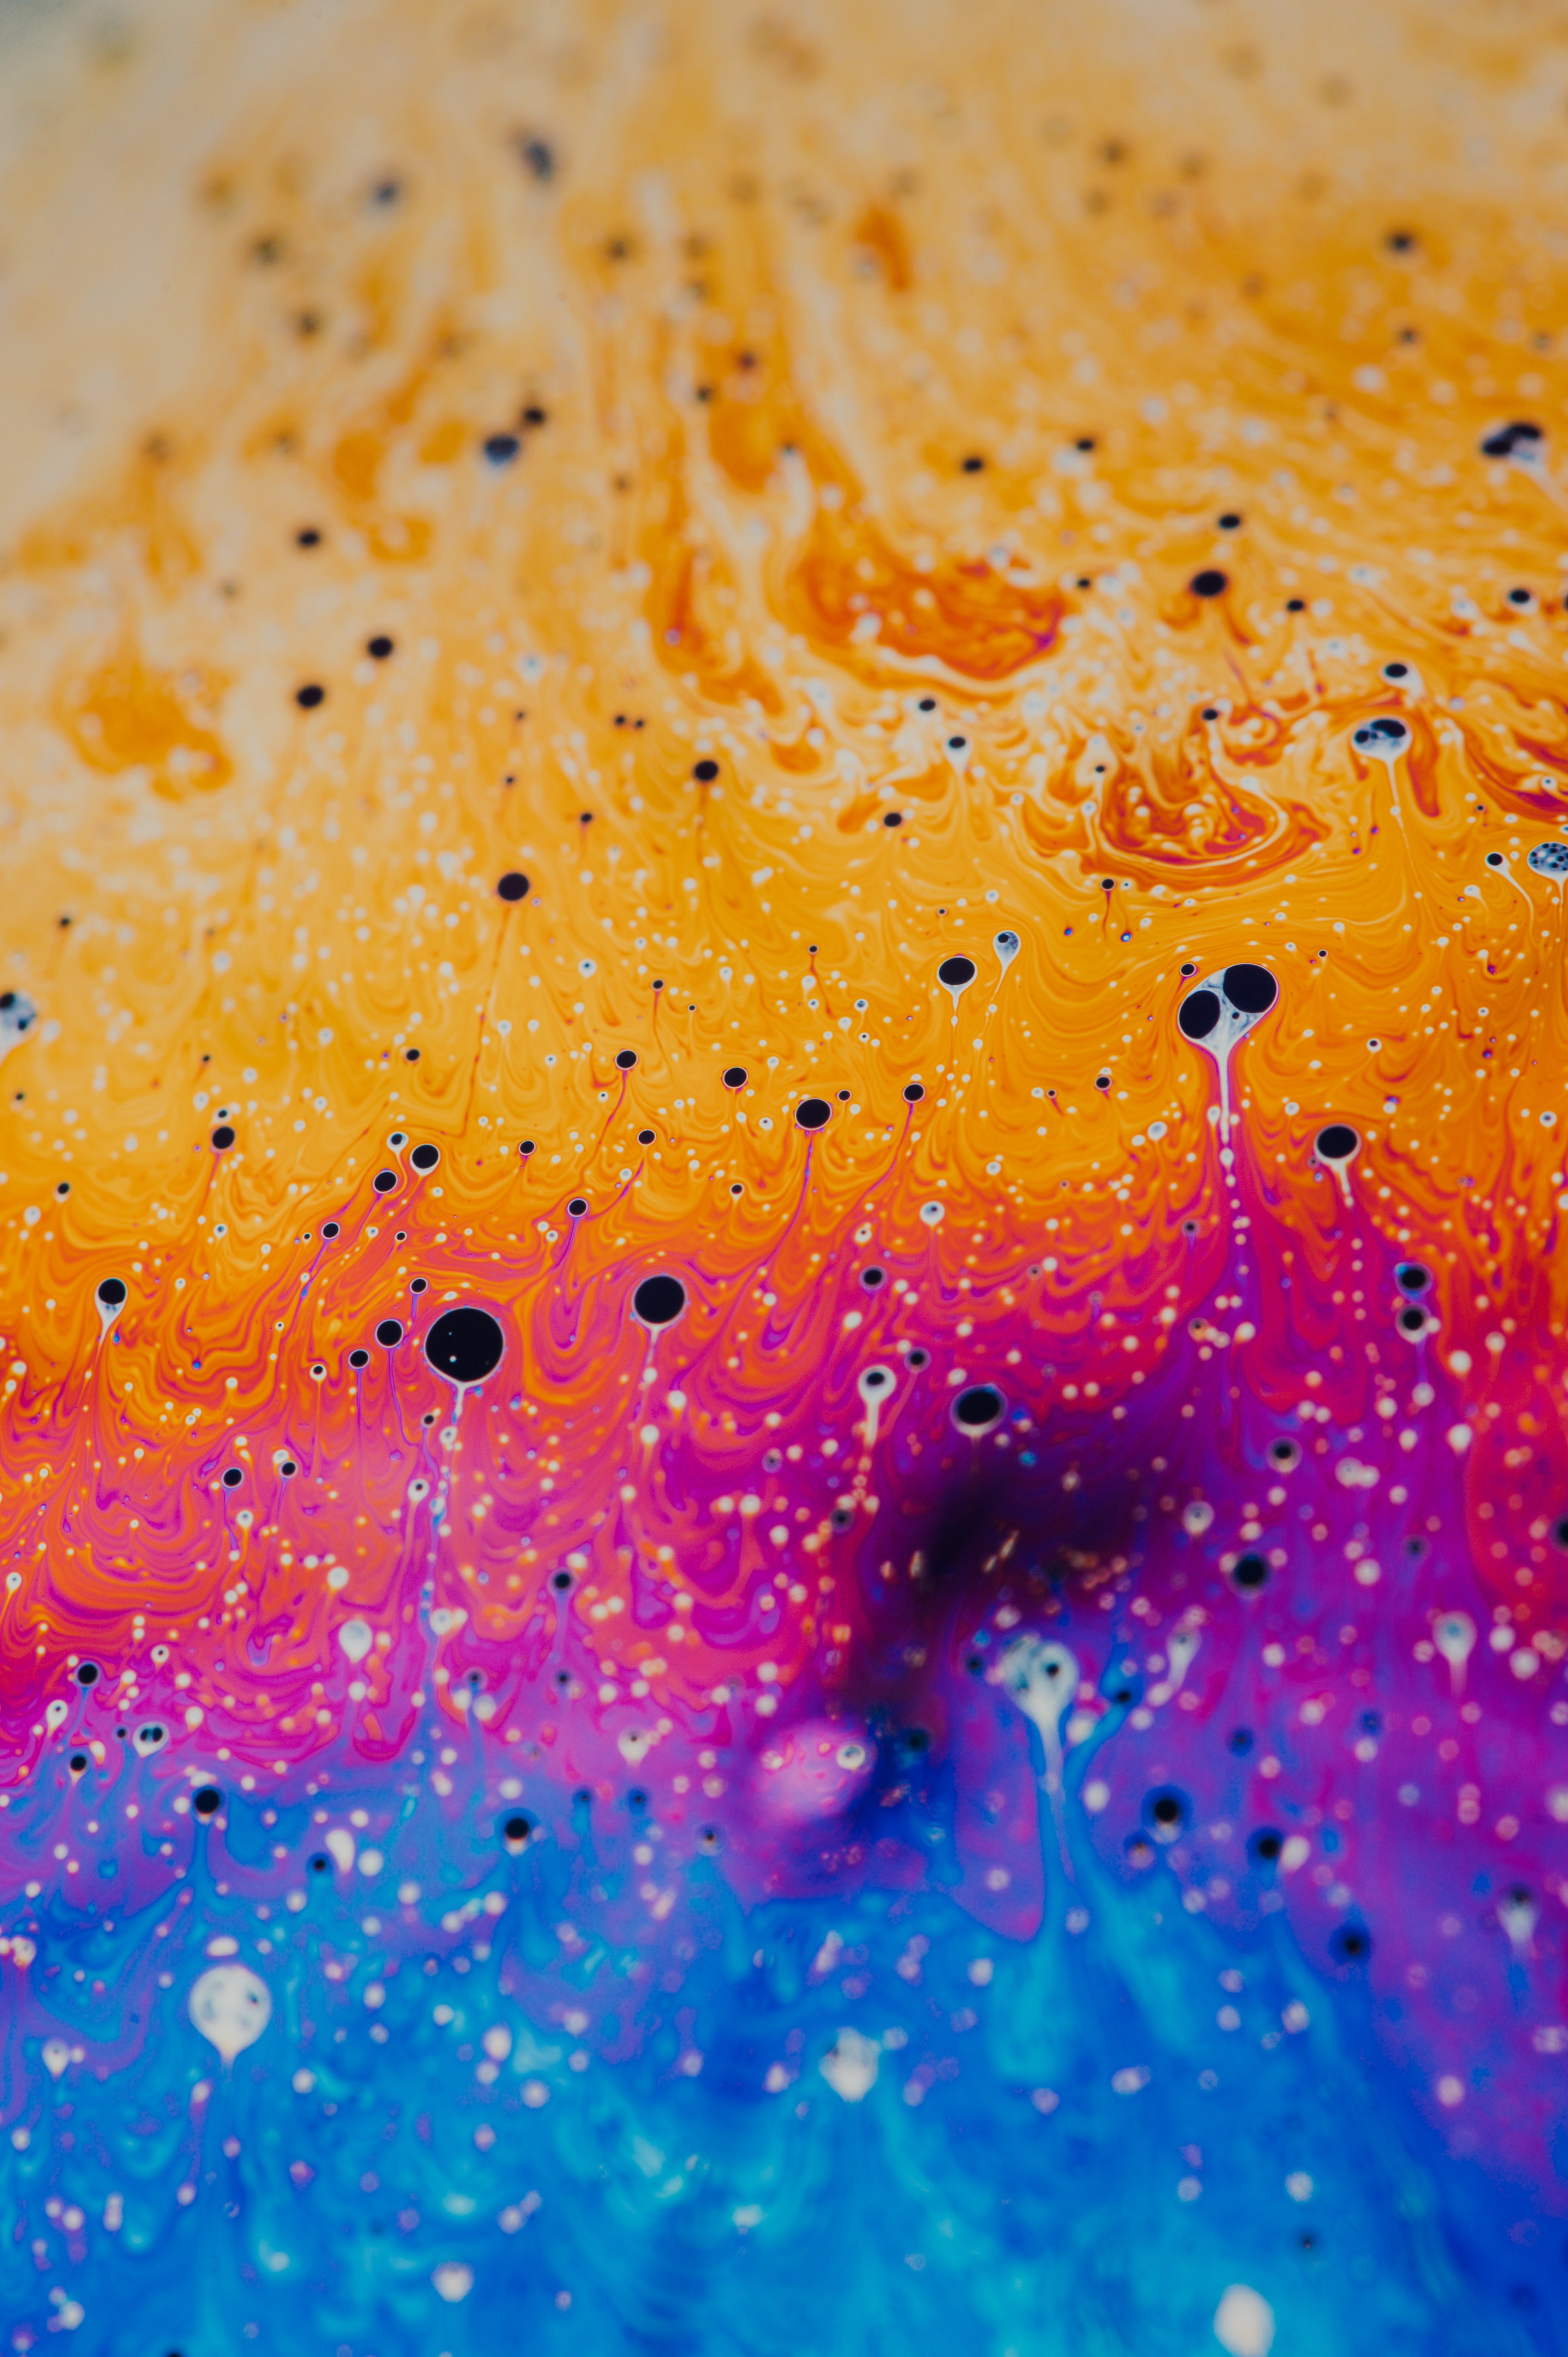 New Lock Screen Wallpapers stains, multicolored, abstract, motley, paint, liquid, spots